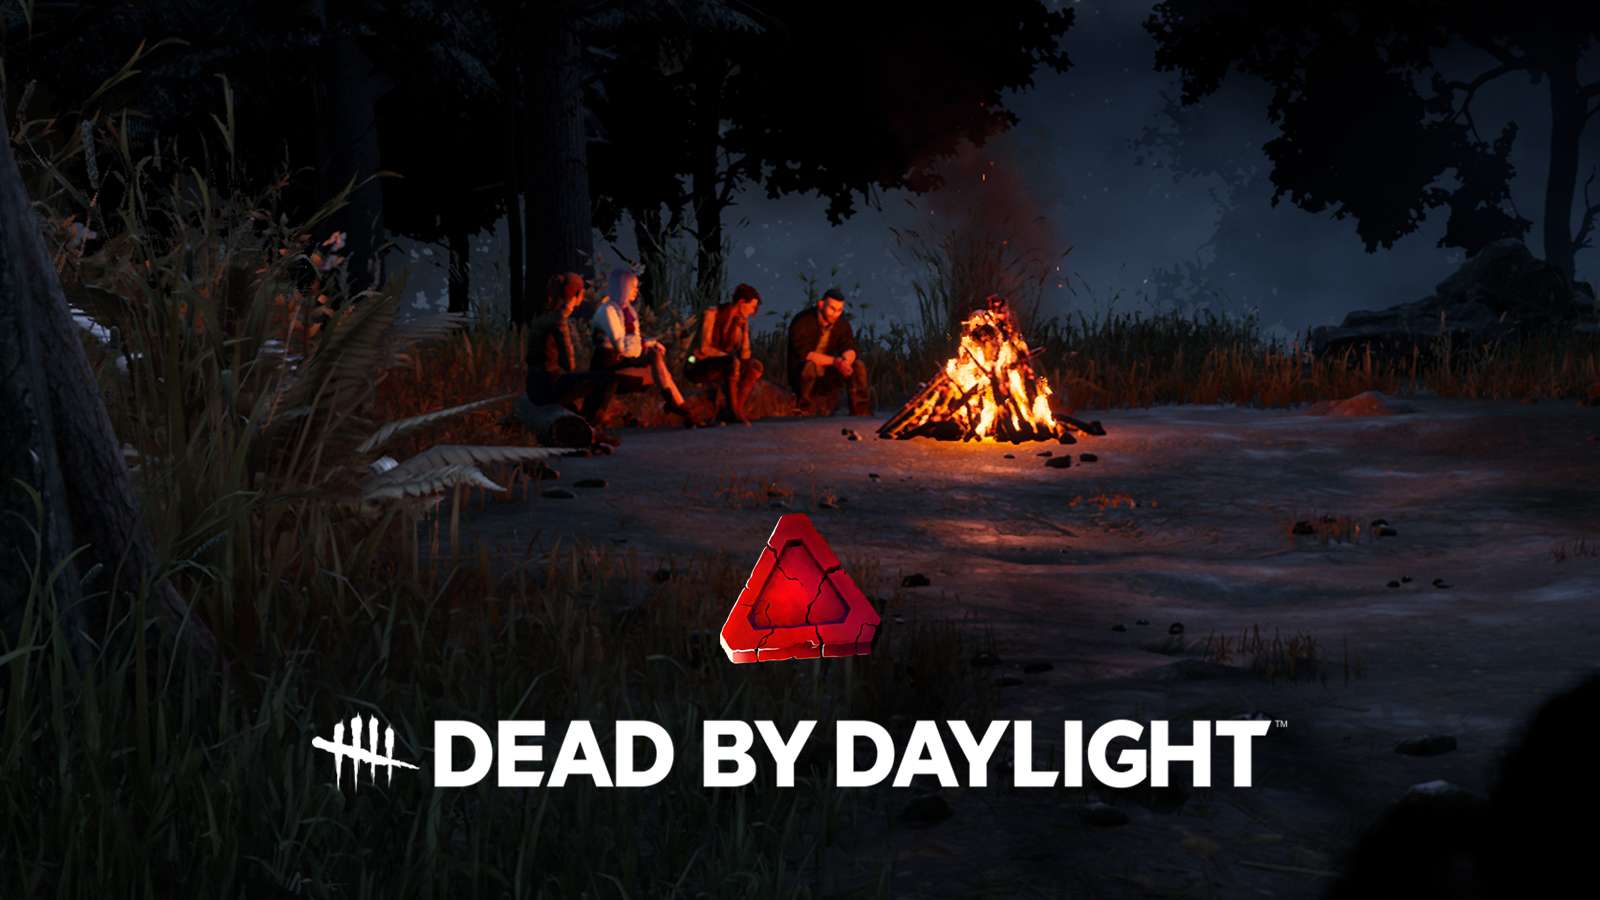 A screenshot showing the Bloodpoints logo alongside the DBD logo and an image of Survivors by a campfire in the game